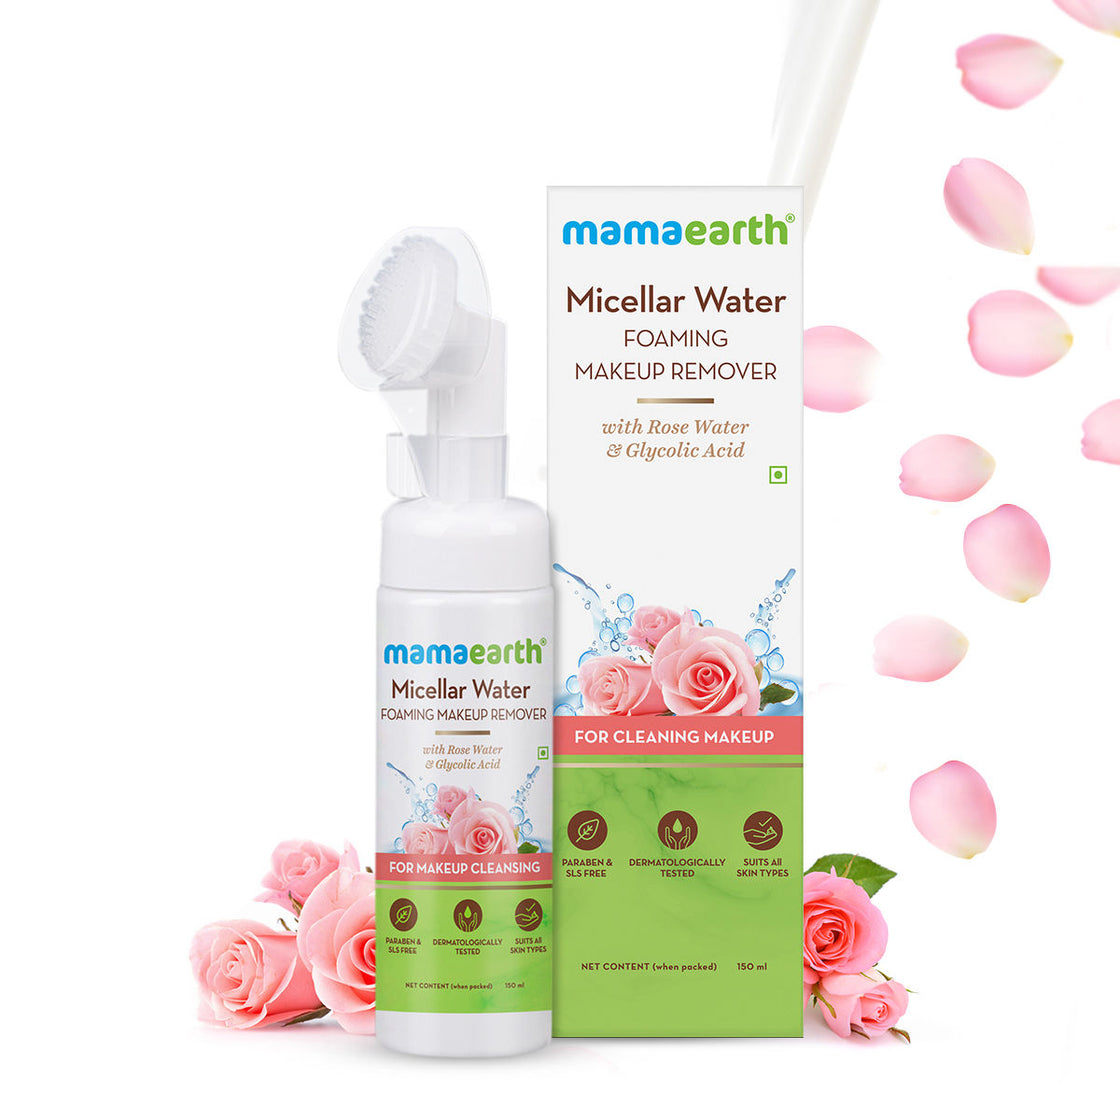 Mamaearth Micellar Water Foaming Makeup Remover With Rose Water & Glycolic Acid For Makeup Cleansing